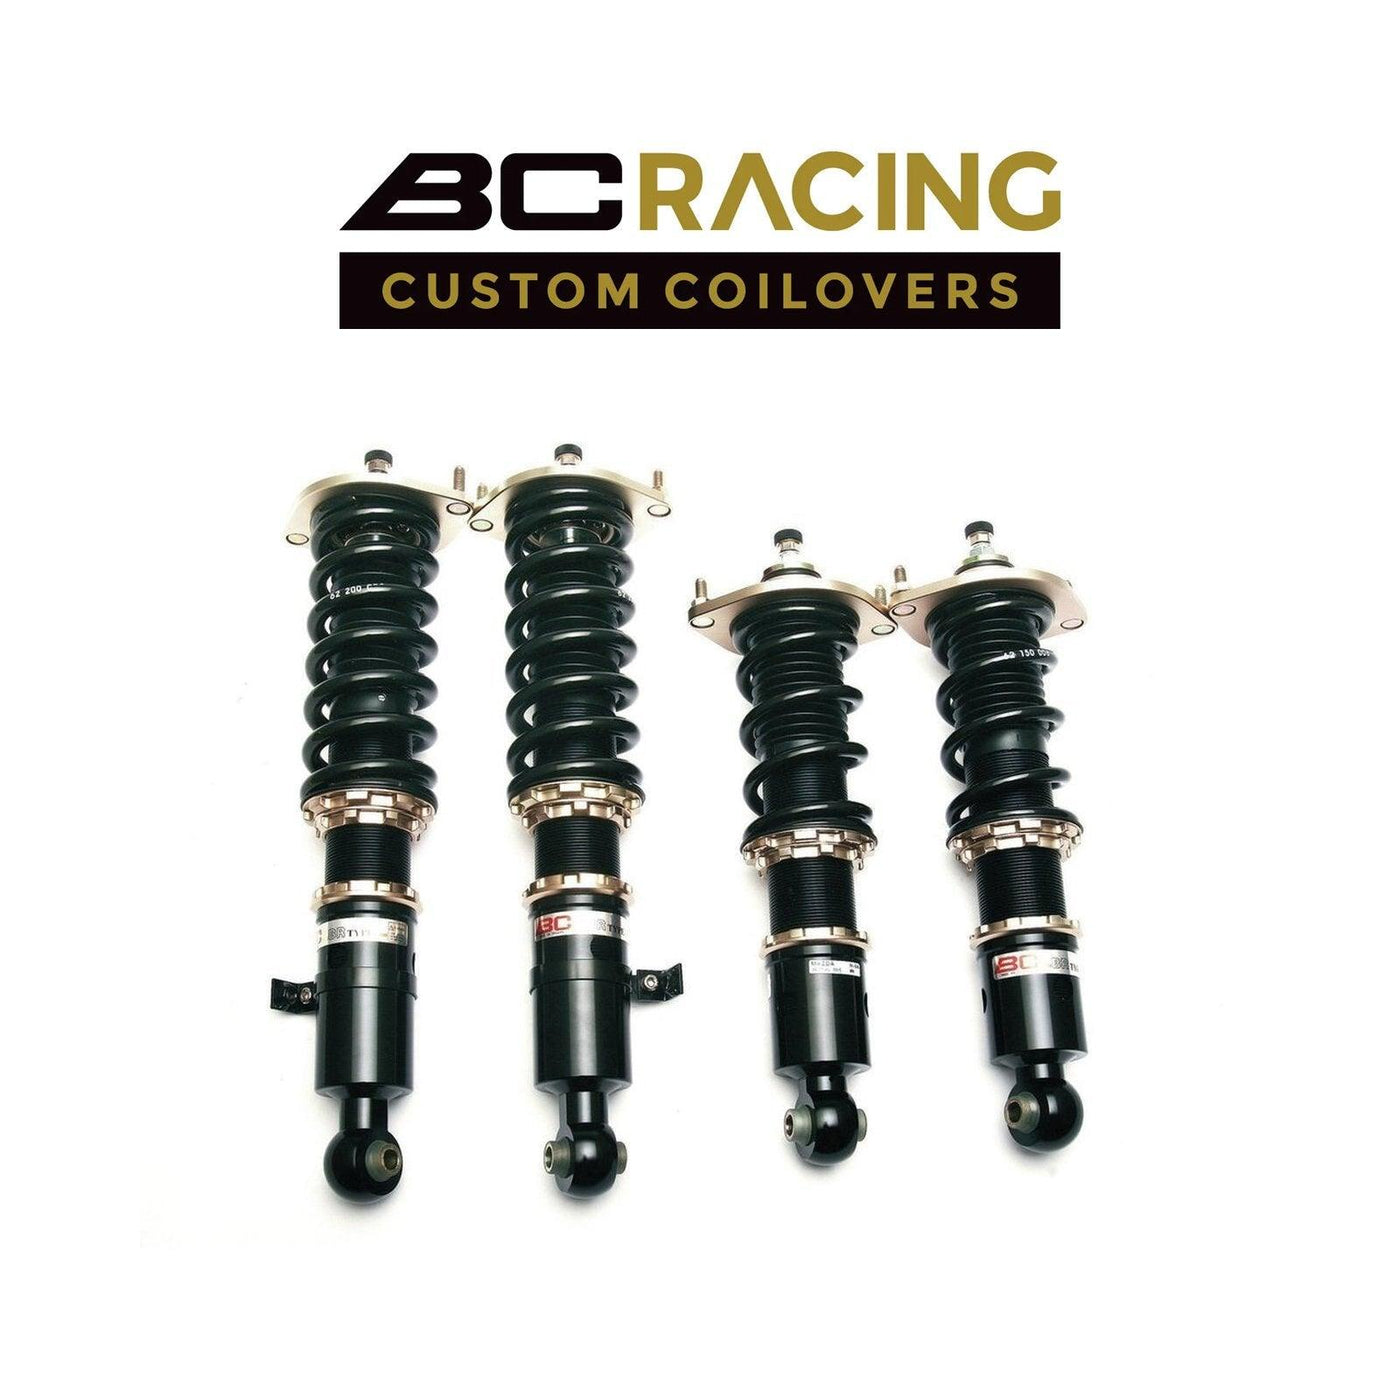 BC Racing Coilovers 2009-2012 INFINITI FX35 RWD - Attacking the Clock Racing